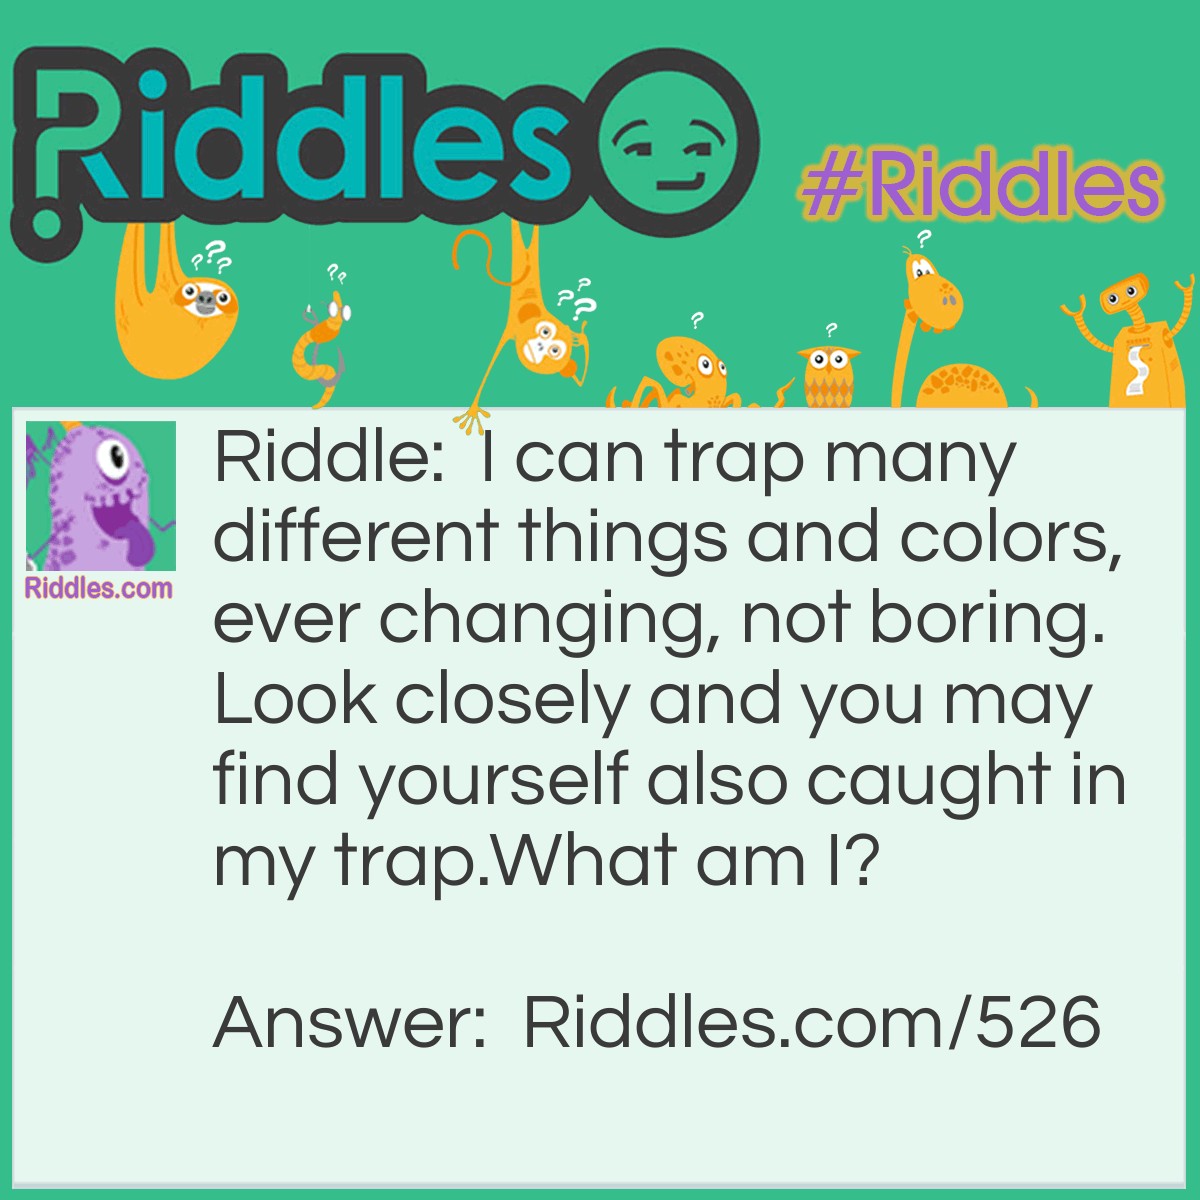 Riddle: I can trap many different things and colors, ever-changing, not boring. Look closely and you may find yourself also caught in my trap.
What am I? Answer: A mirror, or a pool of water.